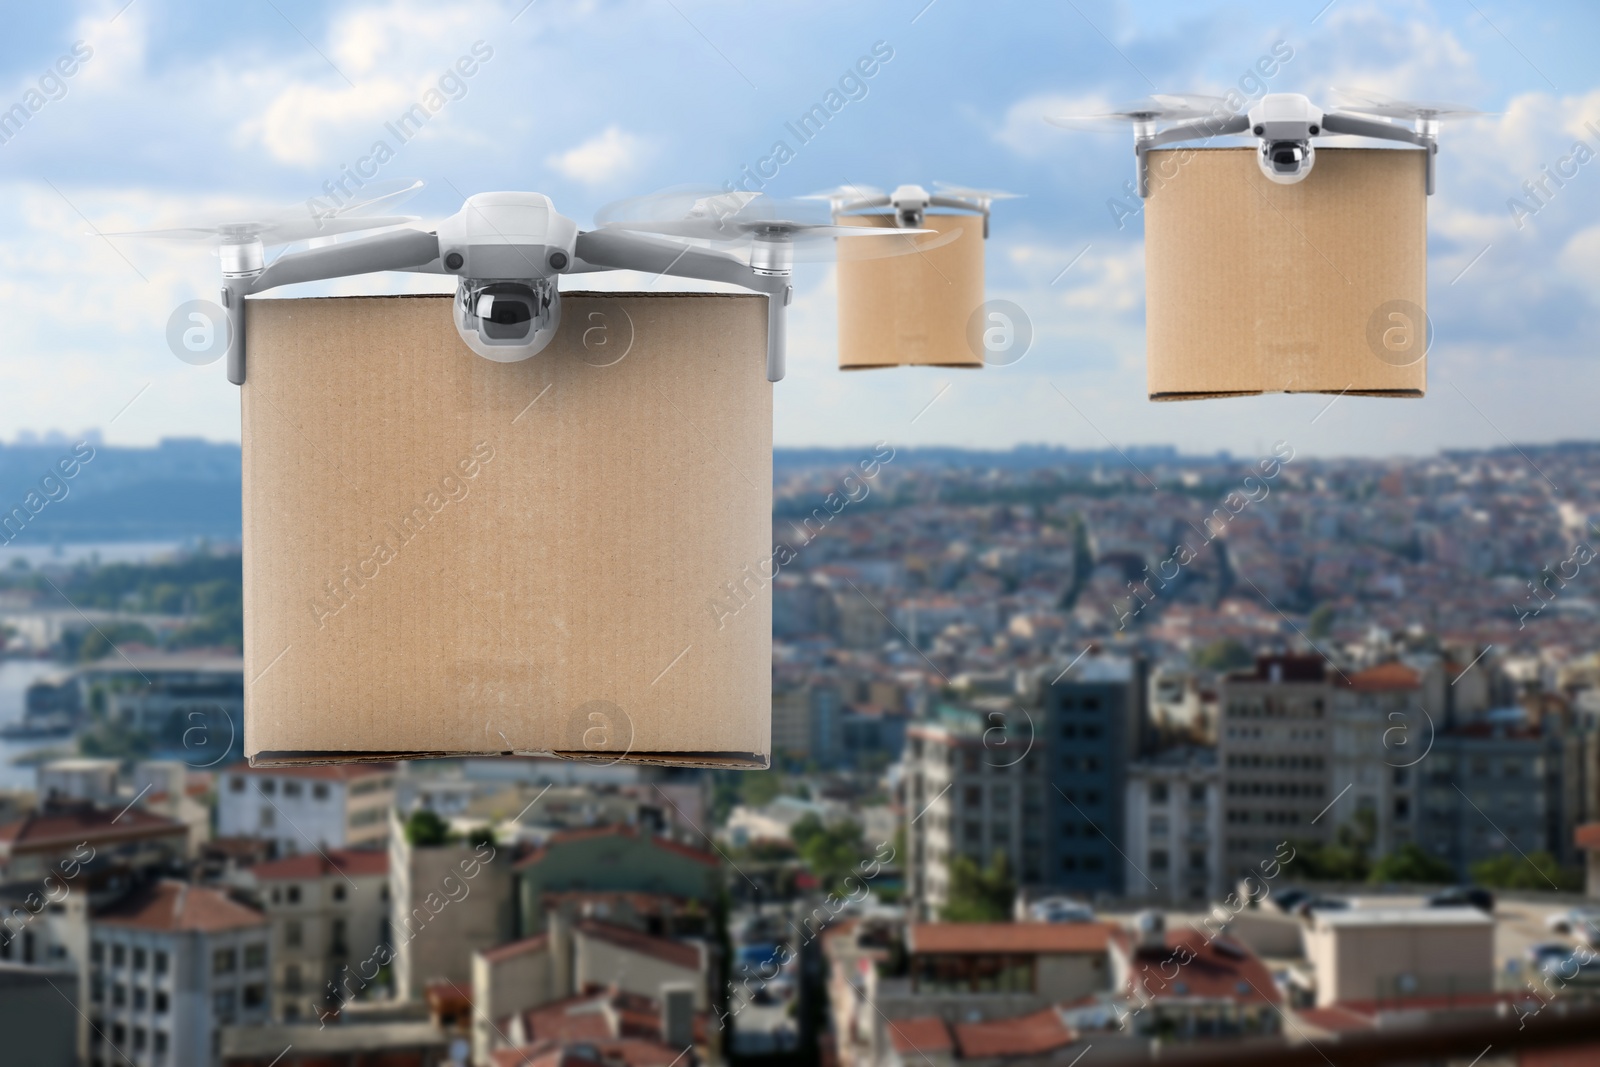 Image of Modern drones with carton boxes flying above city on sunny day. Delivery service 